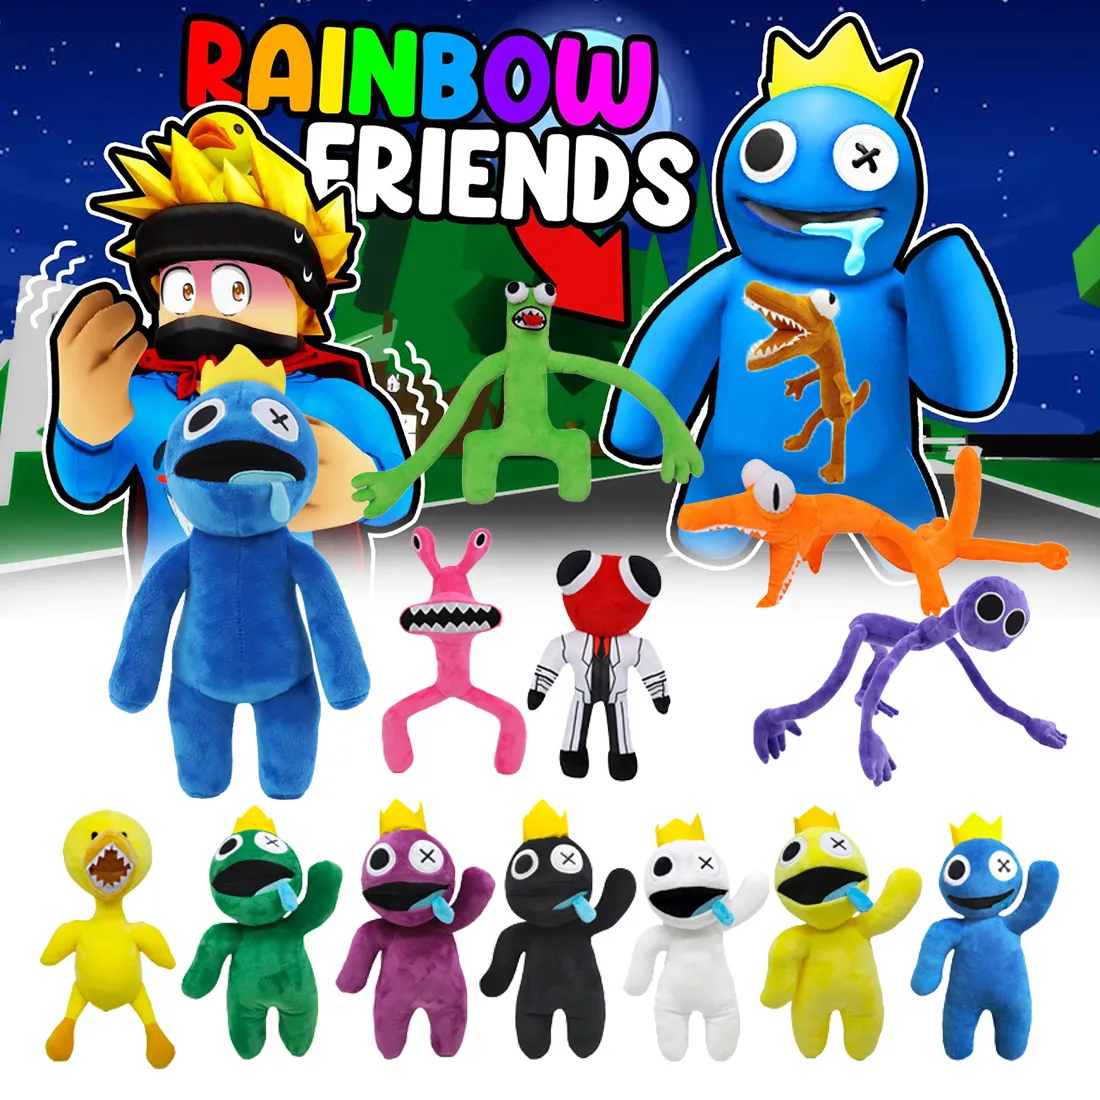 Rainbow Friends Plush Toy Cartoon Game Character Doll Kawaii Blue Monster  Soft Stuffed Animal Toys for Children Christmas Gifts 